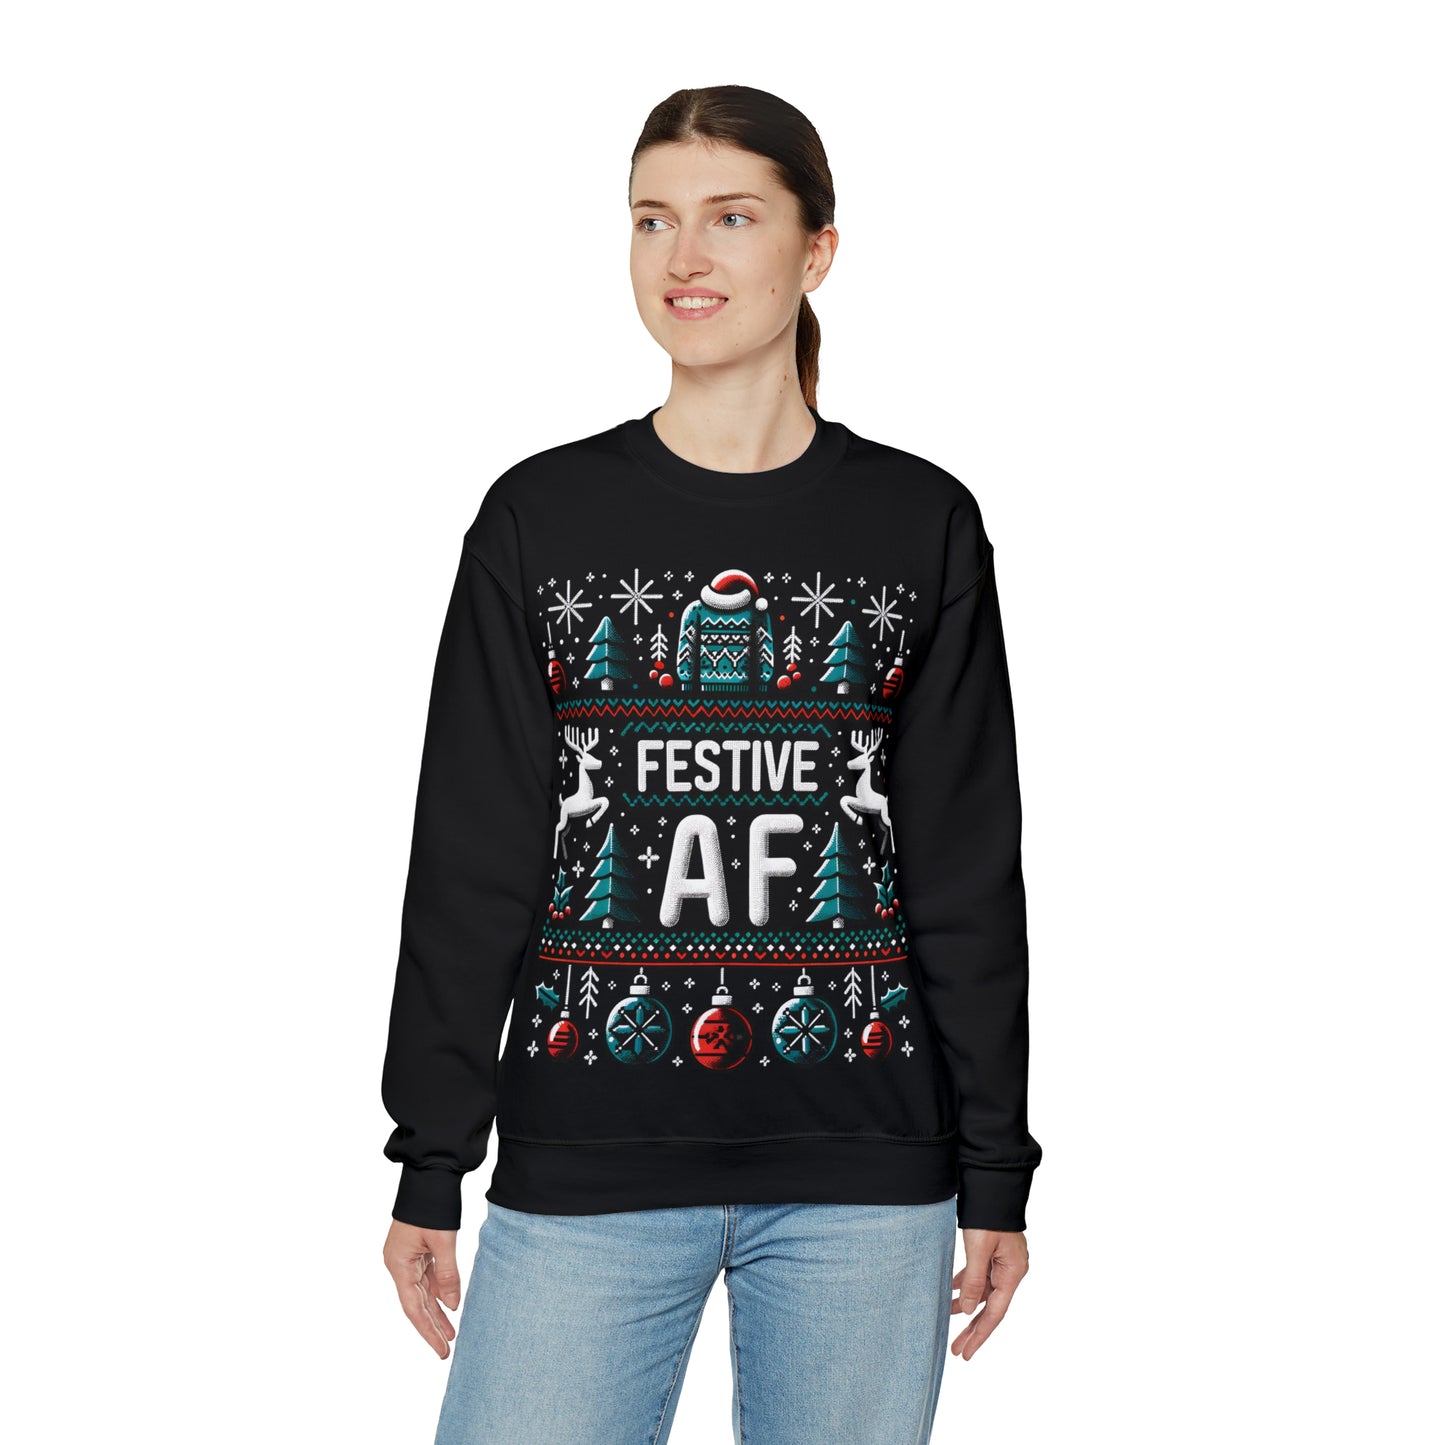 Festive AF Ugly Christmas Sweater, Bad Tacky Xmas Print Women Men Vintage Funny Party Winter Holiday Outfit Plus Size Sweatshirt